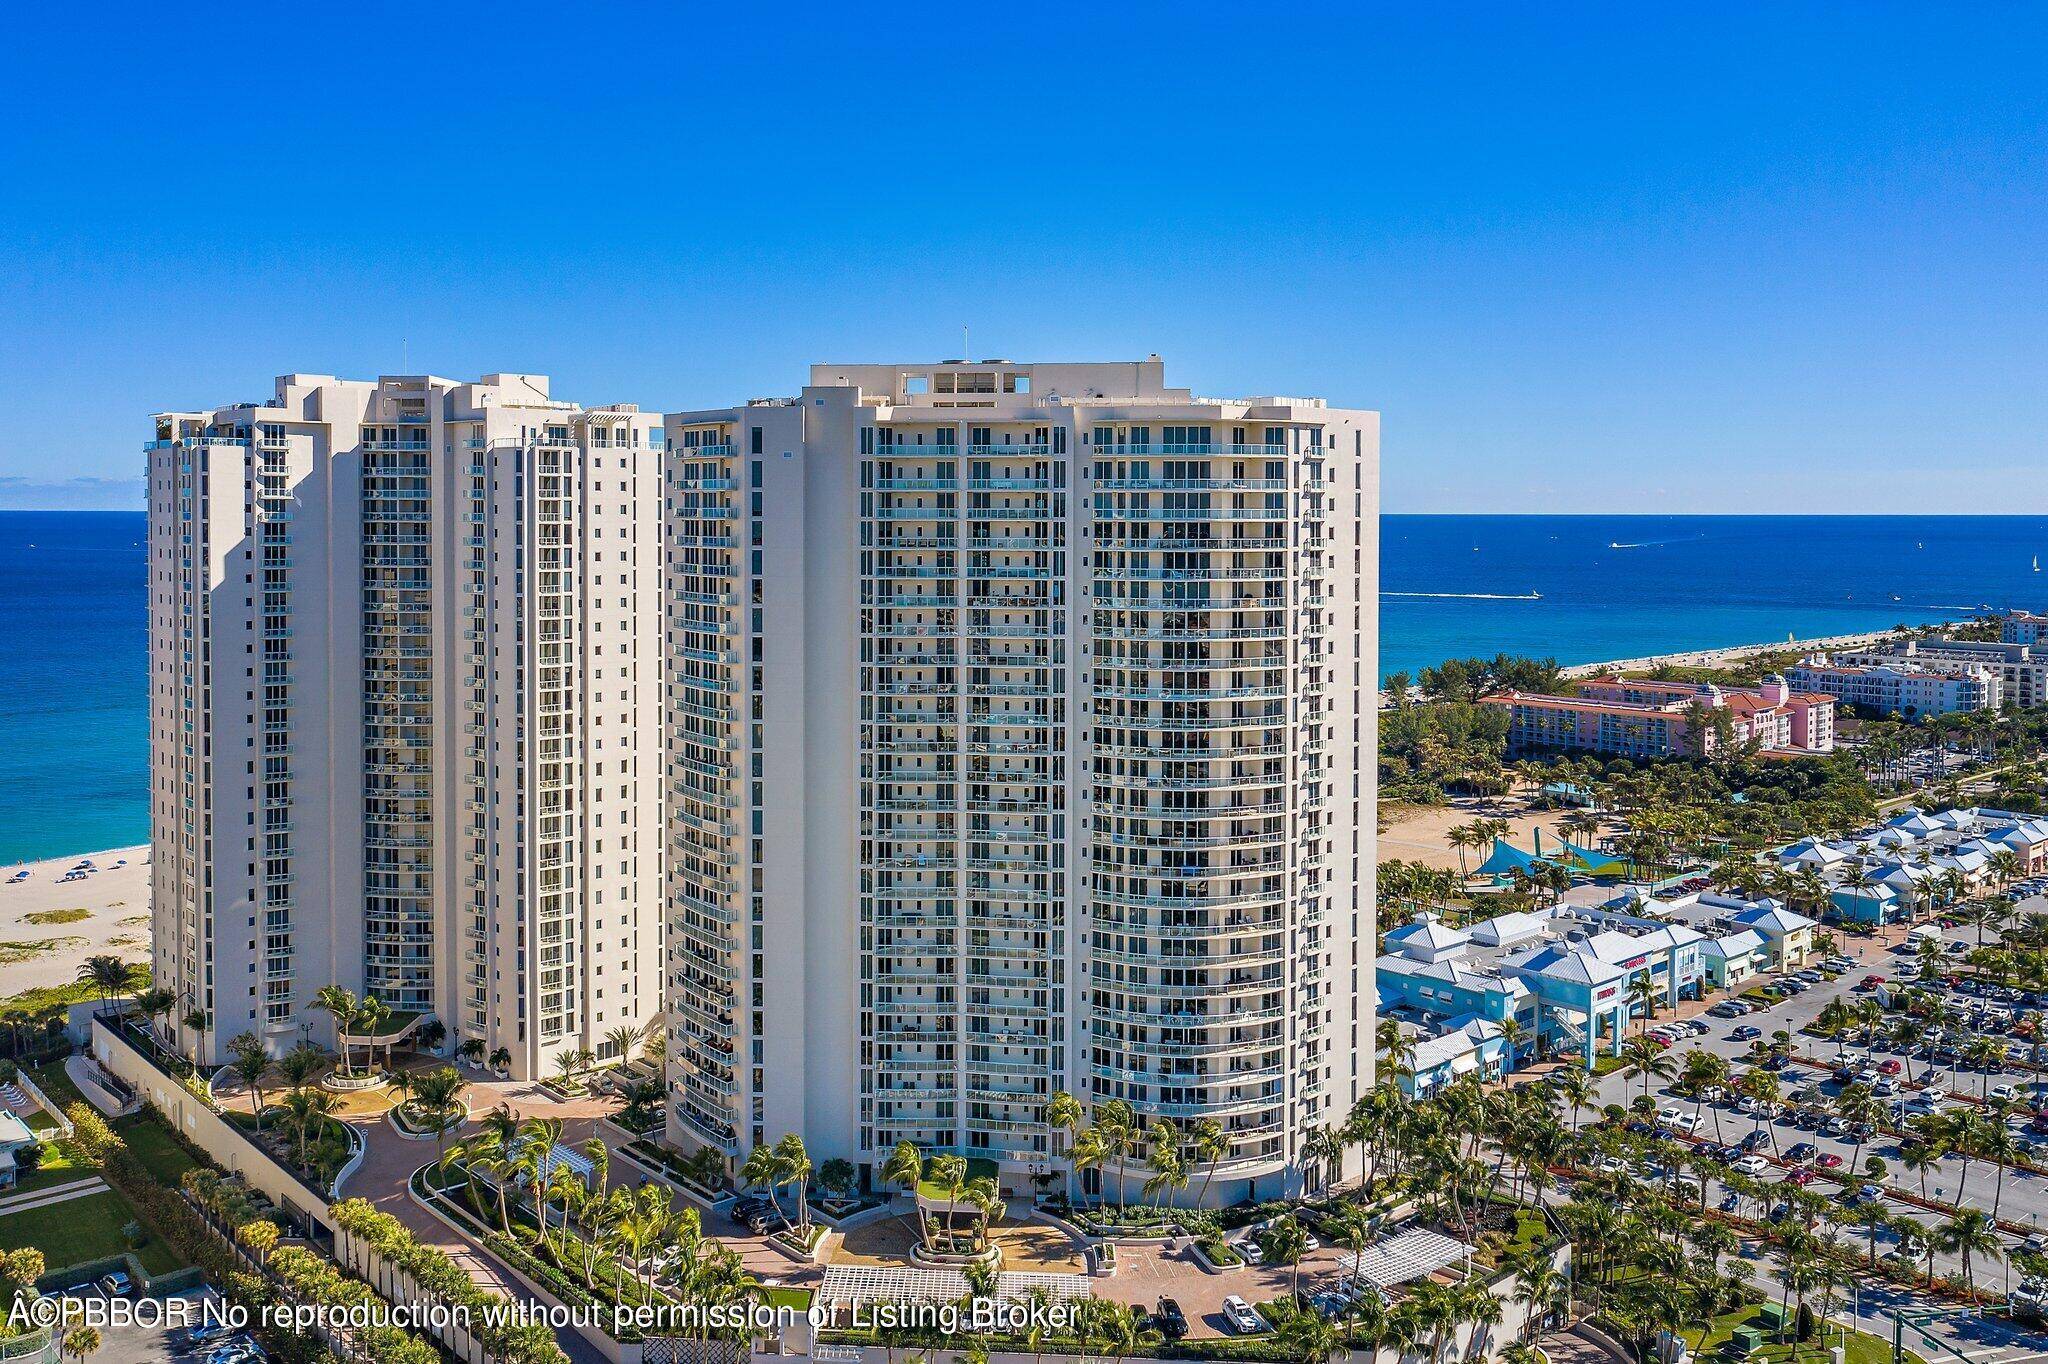 Steps from the beach, this Lower Penthouse Ritz Carlton Residence is beautifully renovated, with 2 private balconies, den bonus room and wet bar.